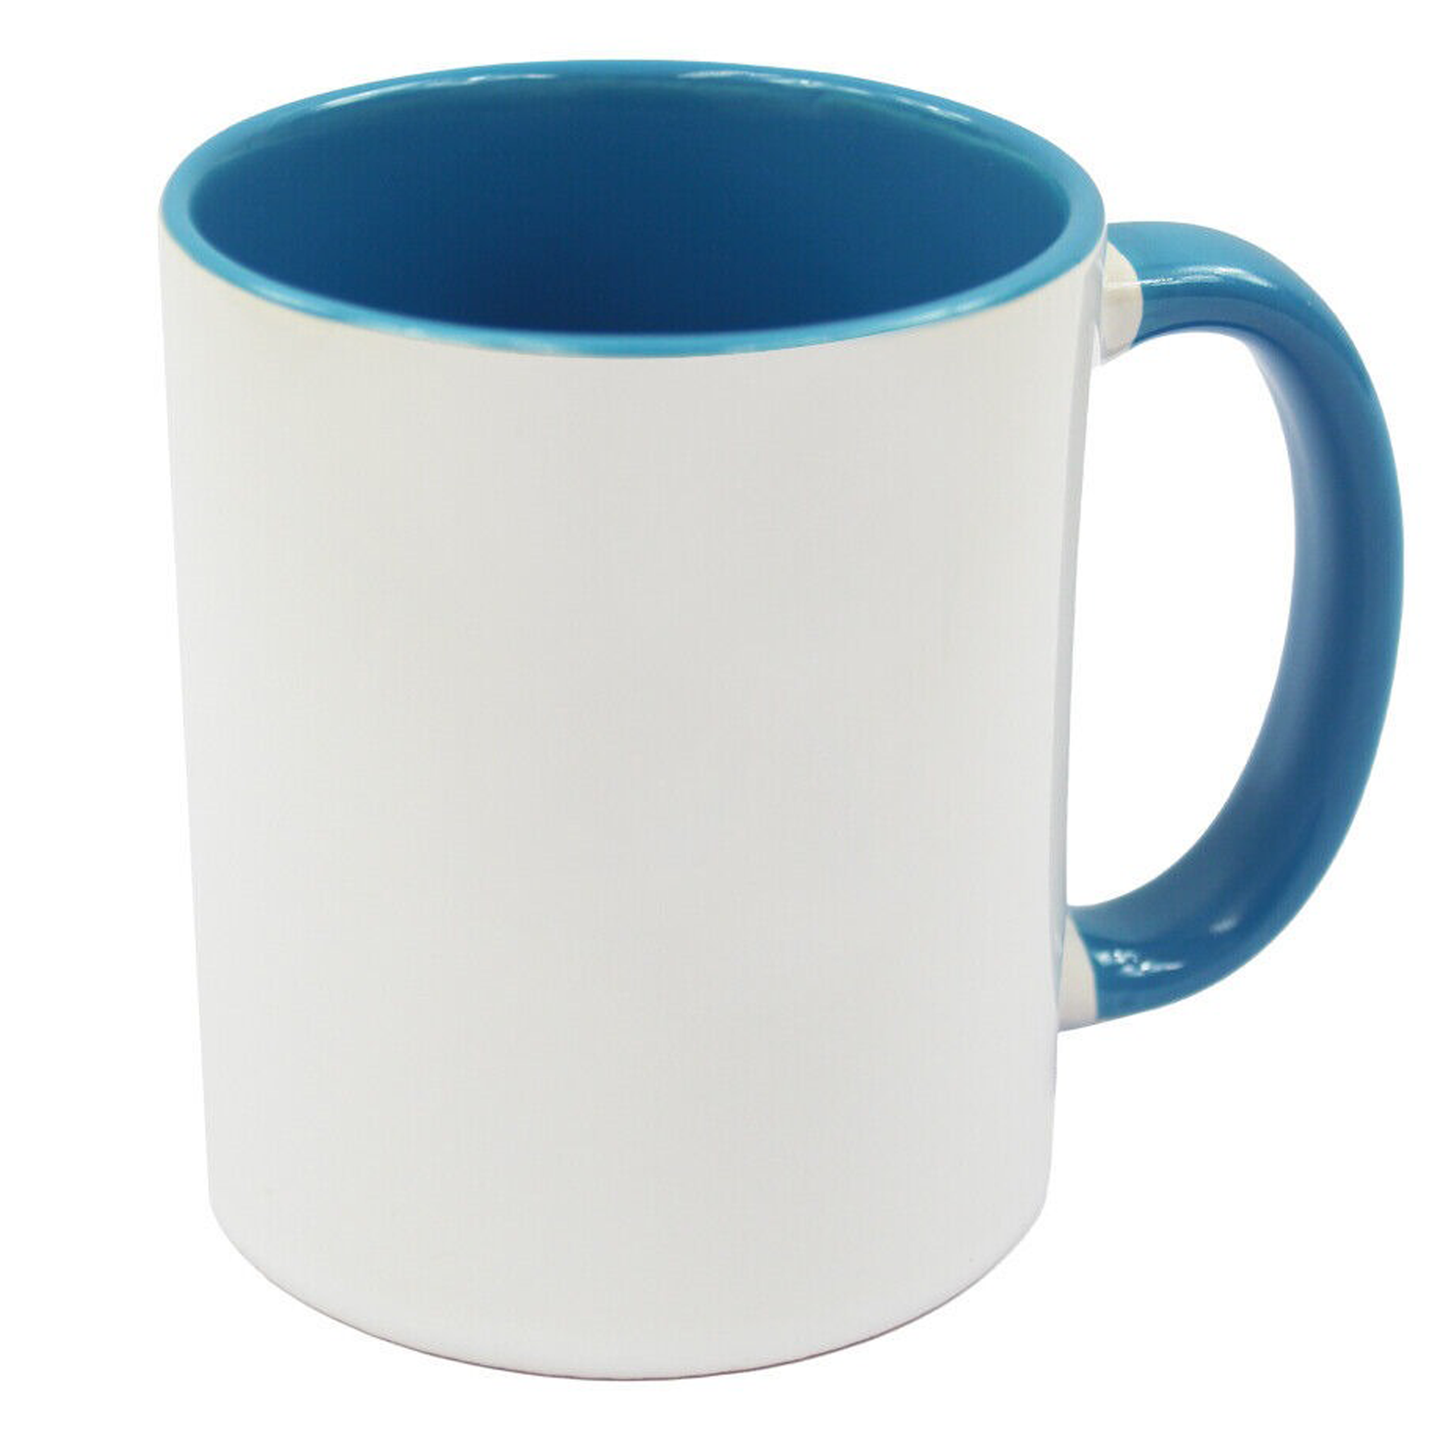 24 Pack-11 once White sublimation mugs inner color BLUE and handle with reinforced foam box packaging